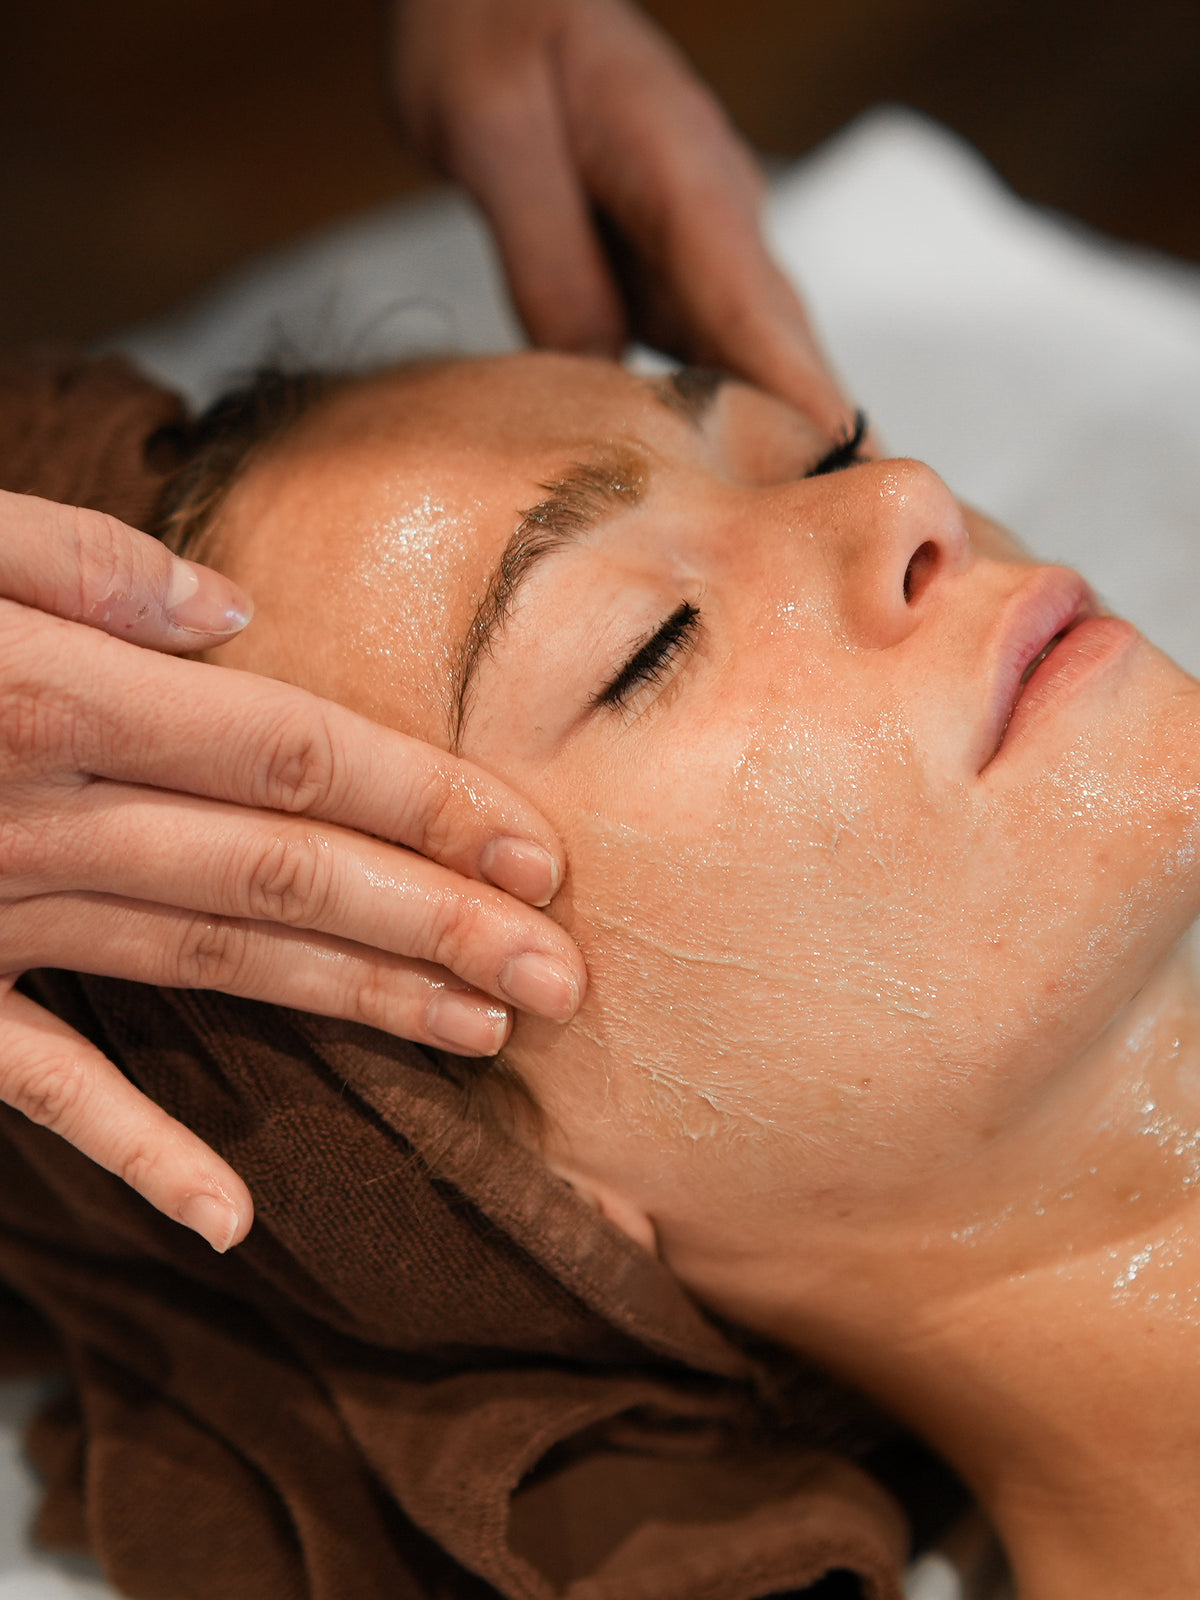 Scalp and Face Massage